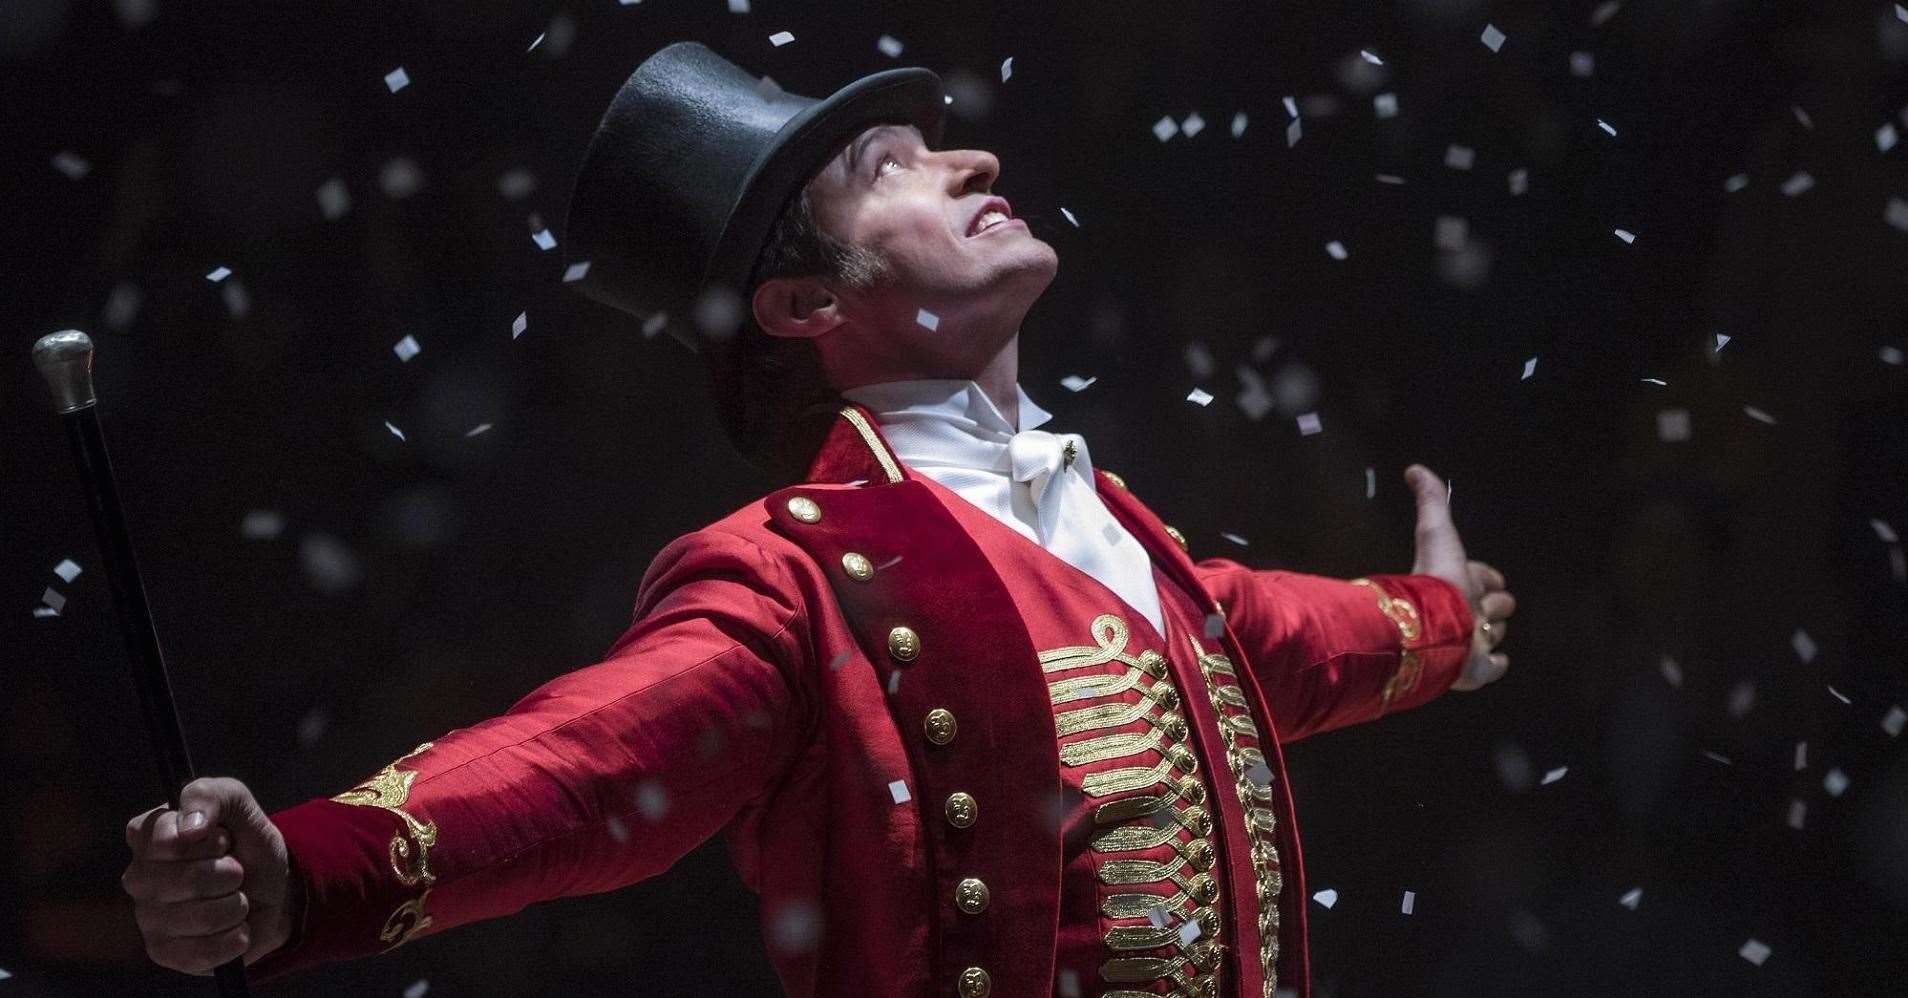 The Greatest Showman will be screened by Luna Cinema